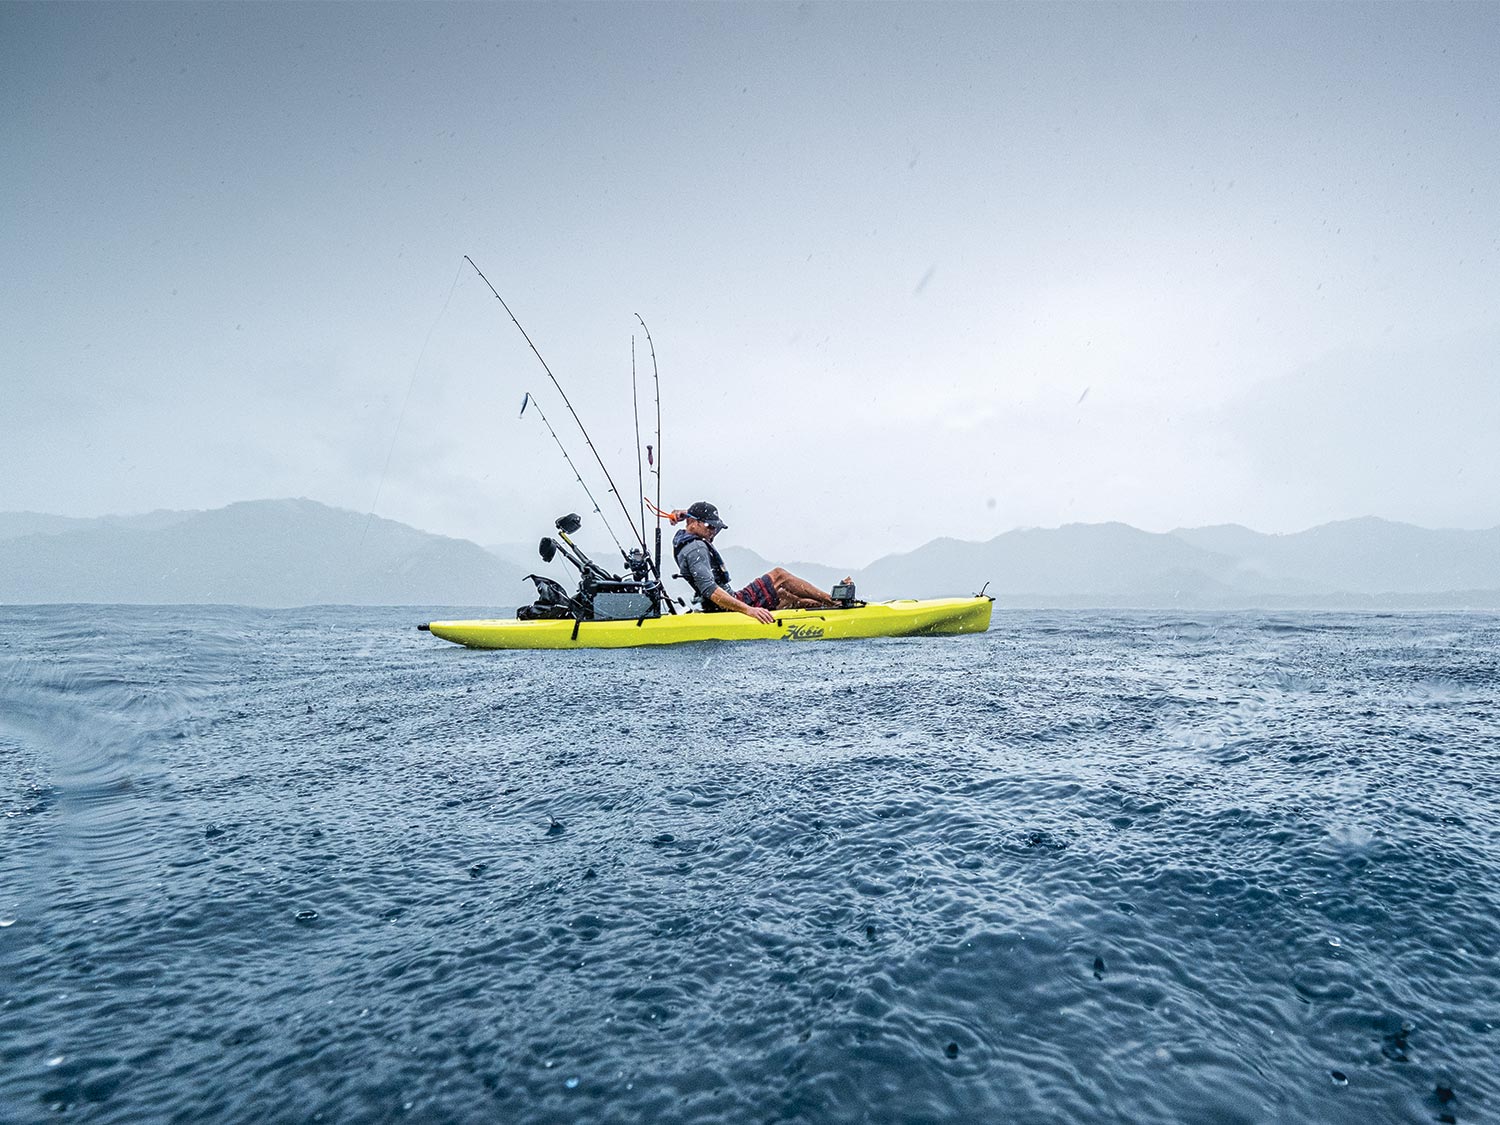 Lance Clinton fishing in a rain squall off Costa Rica.